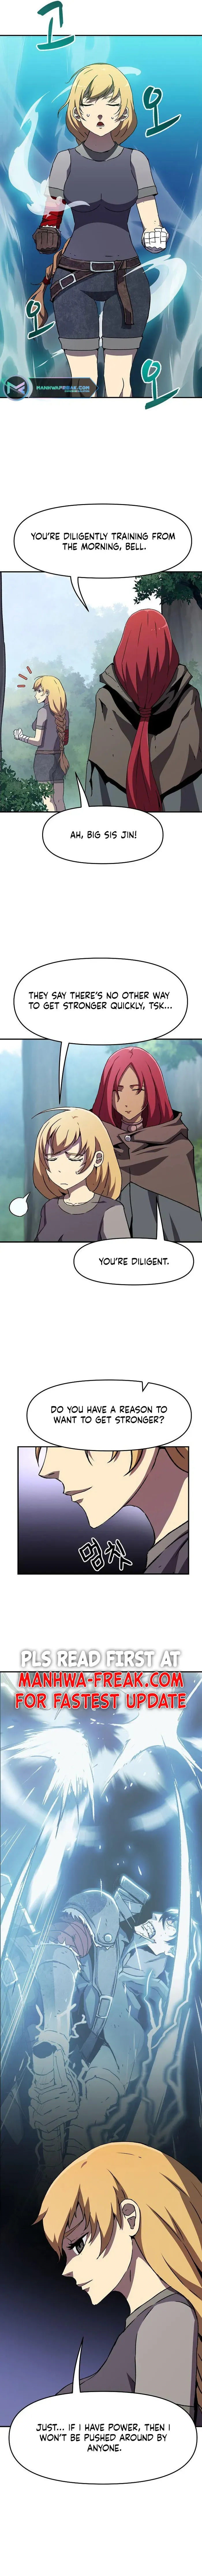 A Knight With a Time Limit Chapter 13 page 9